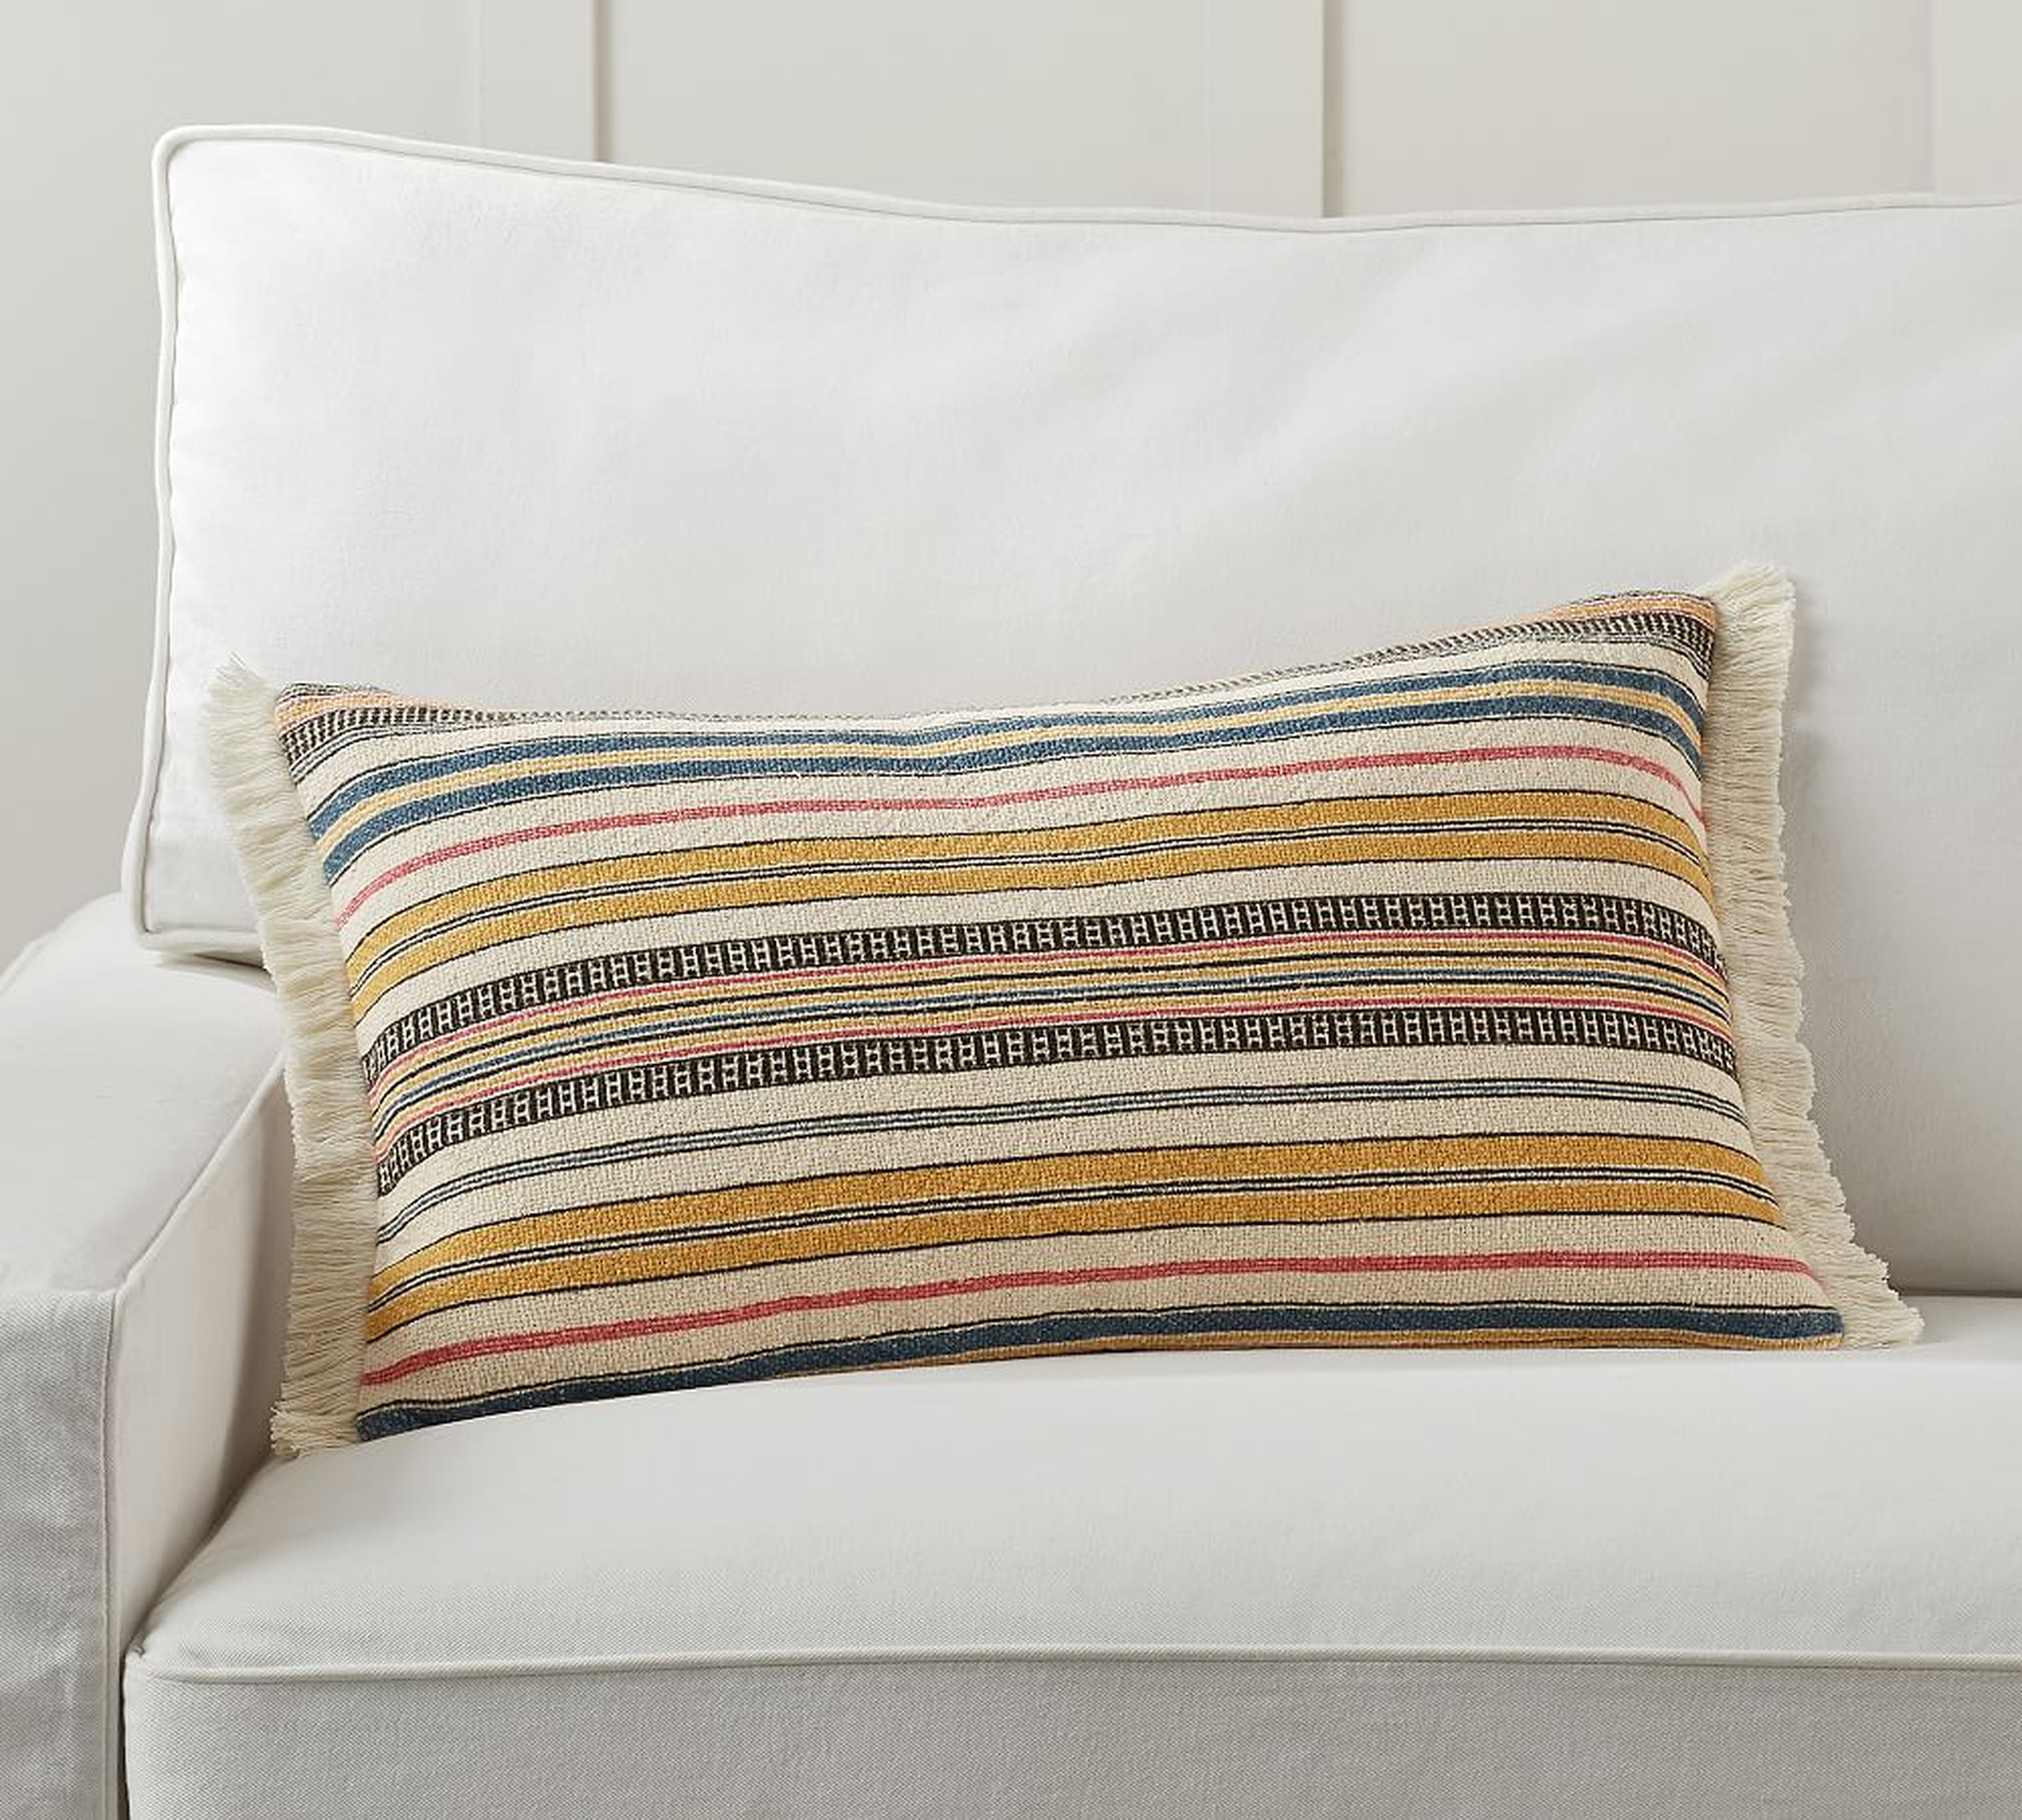 Cassidy Striped Lumbar Pillow Cover, 16 x 26", Multi - Pottery Barn